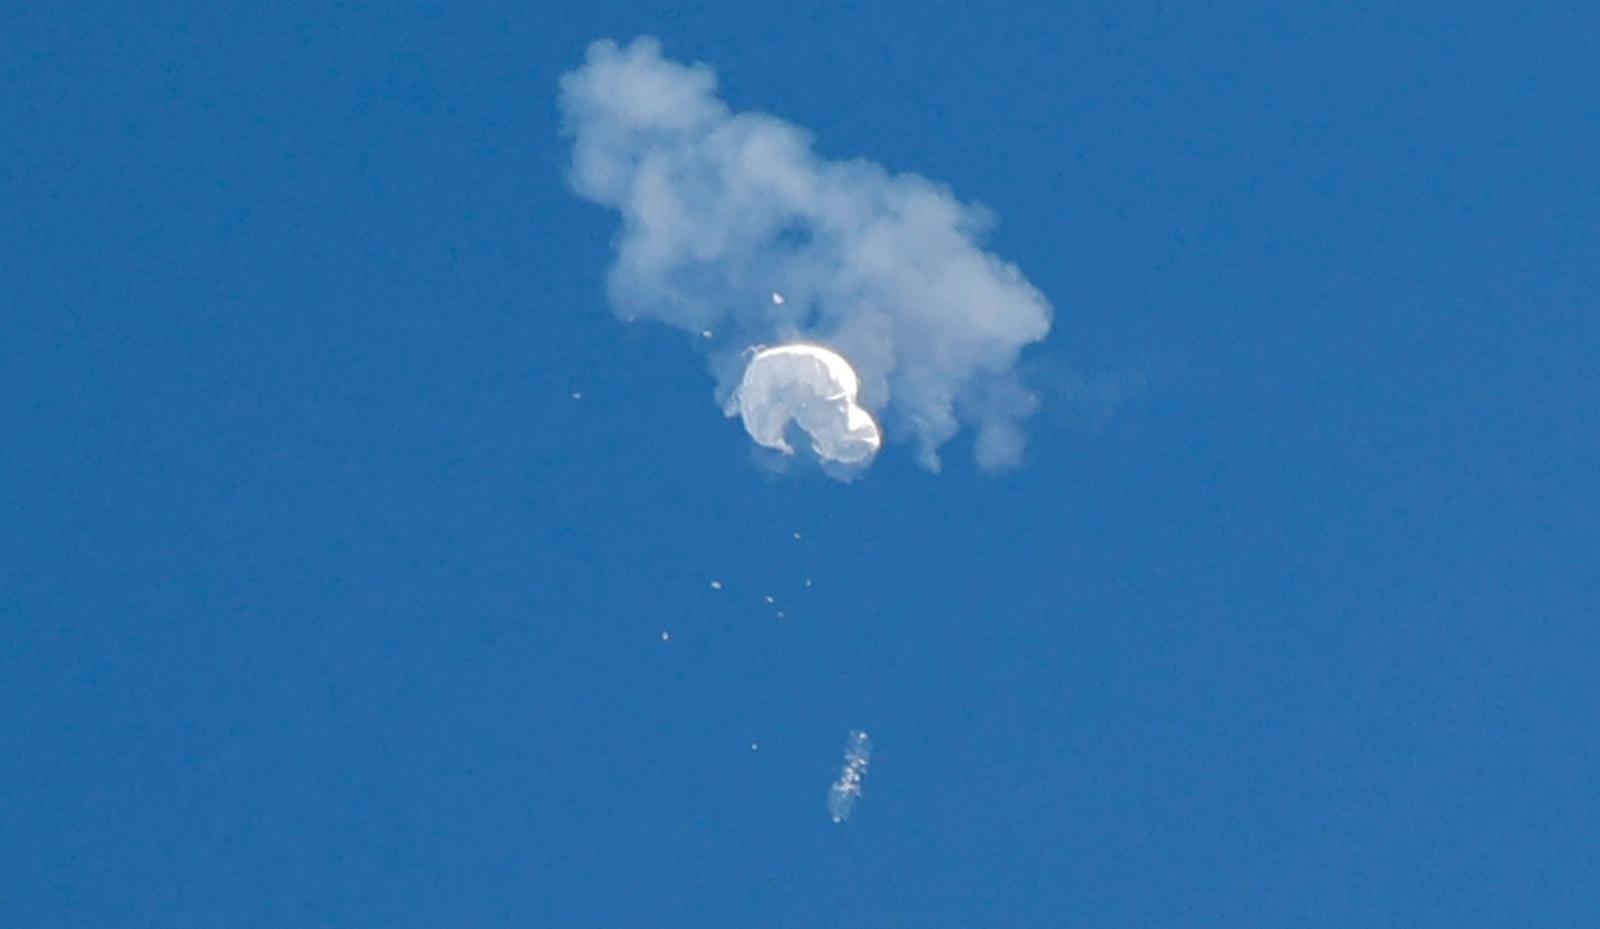 The suspected Chinese spy balloon drifts to the ocean after being shot down off the coast in Surfside Beach, South Carolina, U.S. February 4, 2023. 